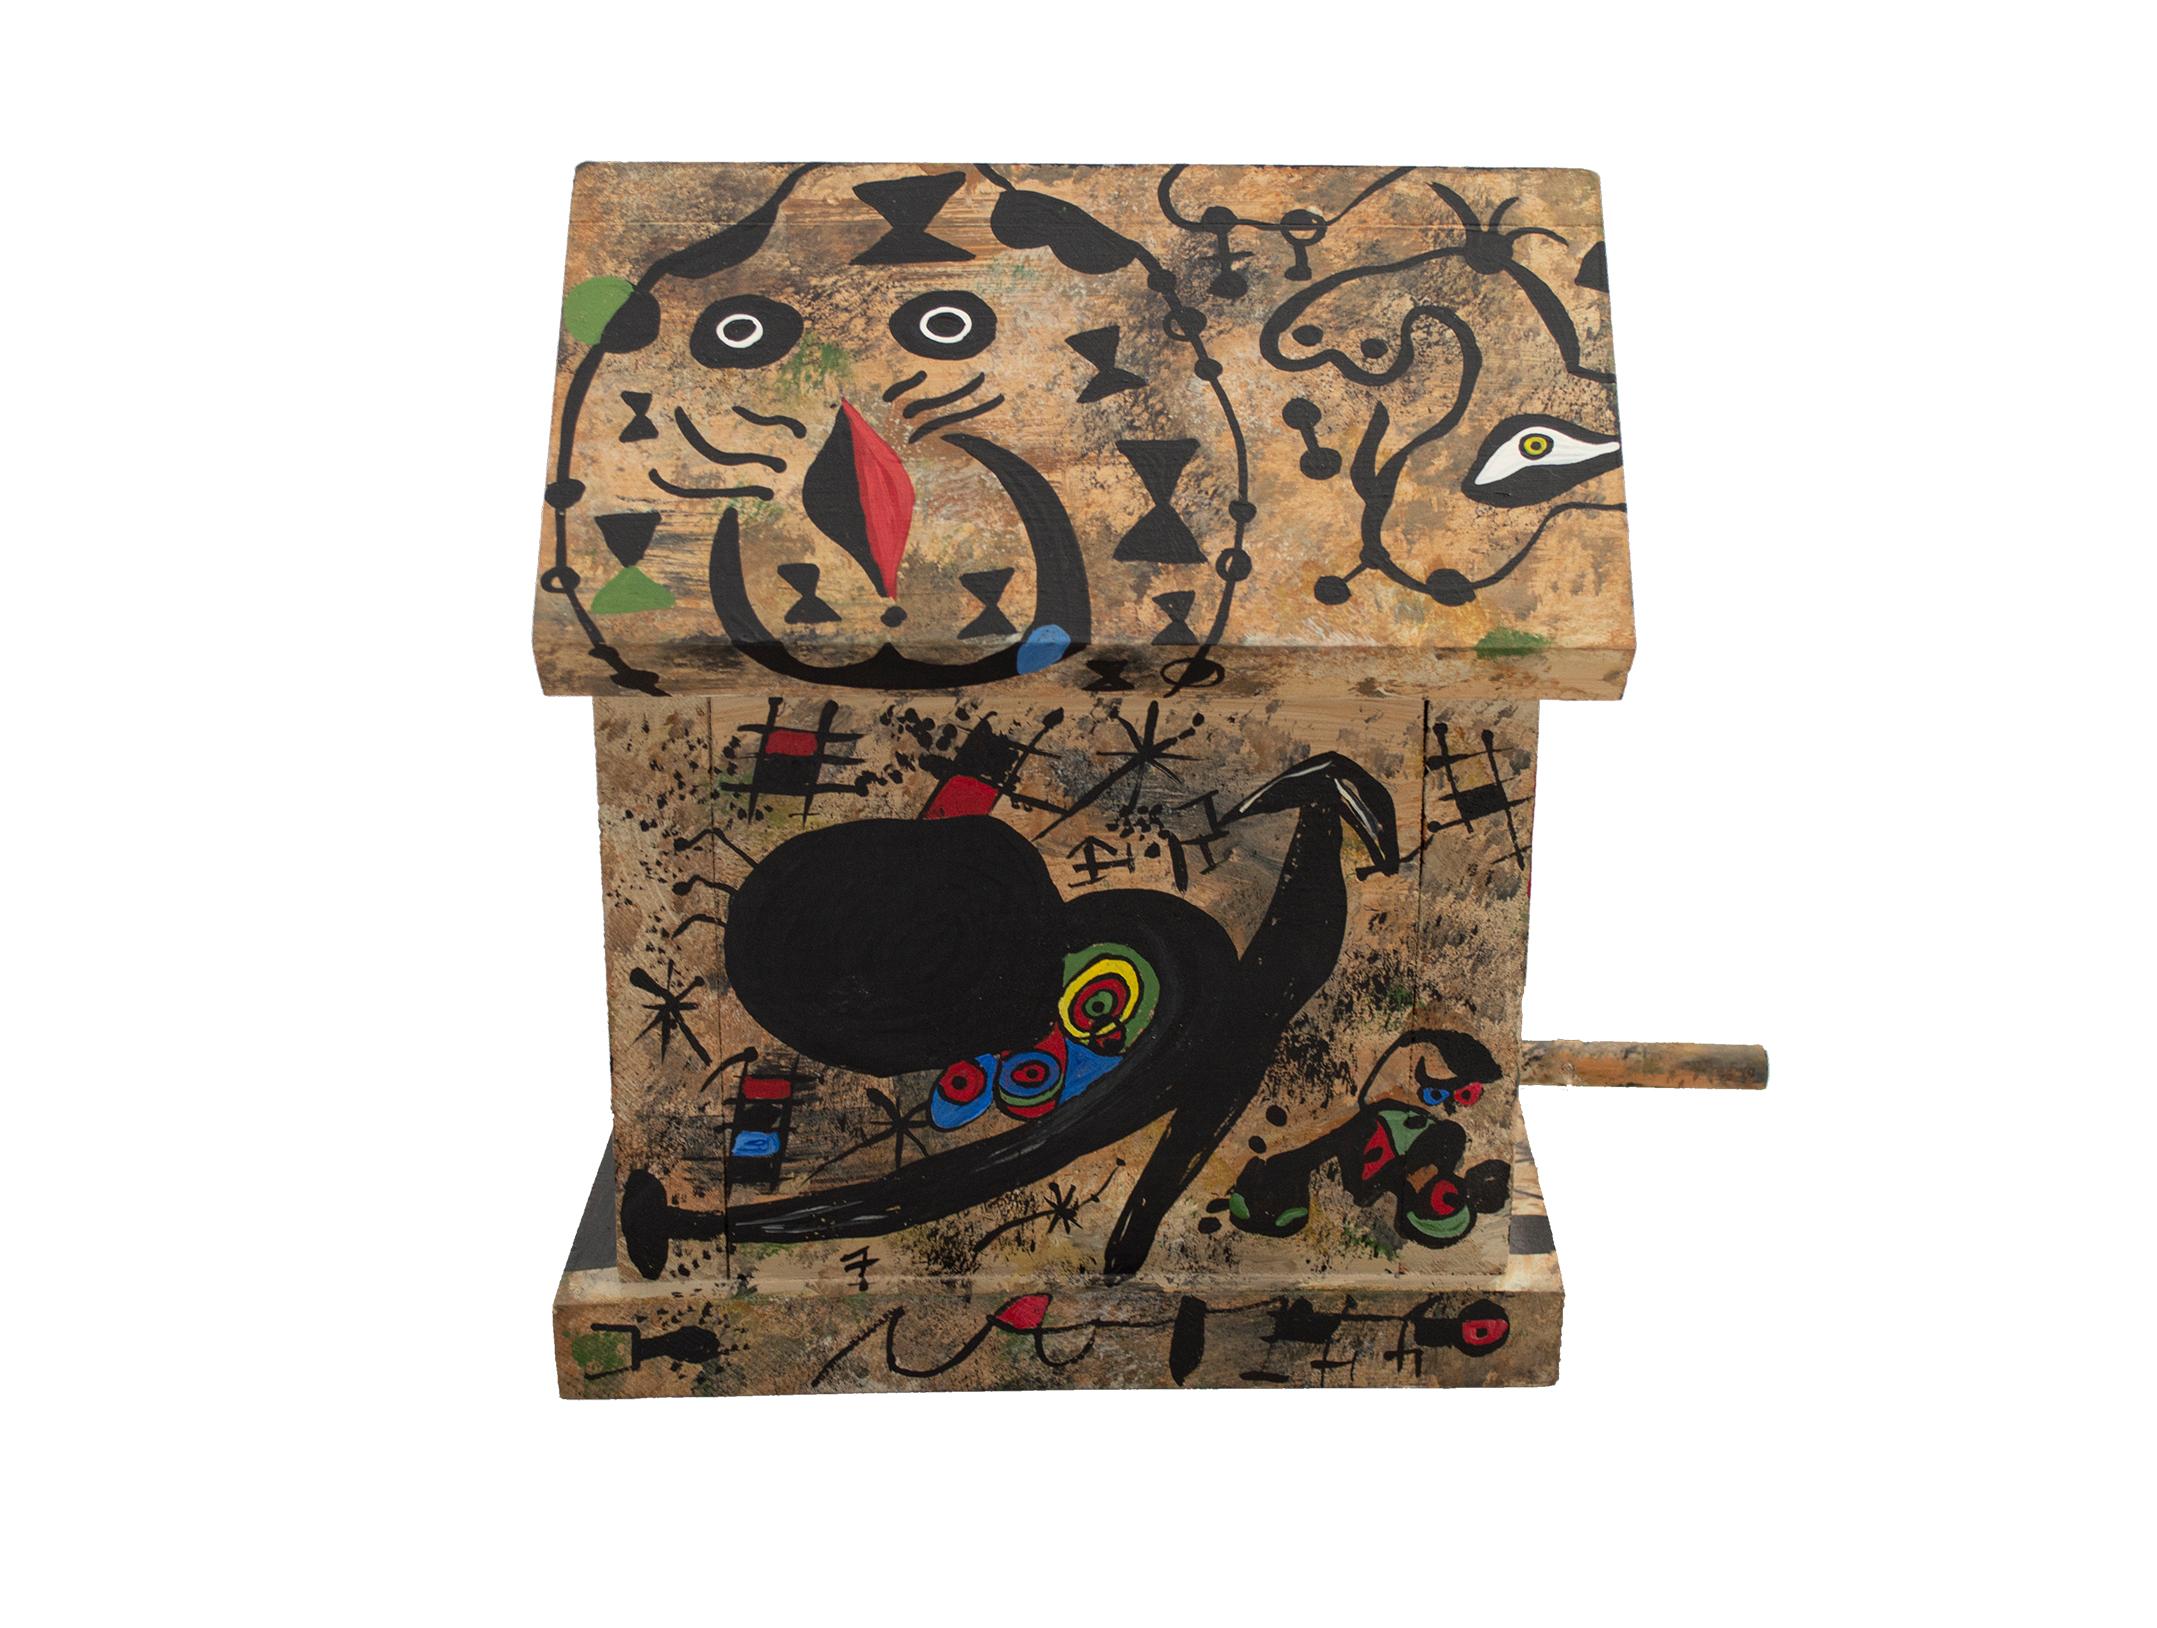 Kyle Zubatsky Abstract Sculpture - "Miro, Miro, On the Wall... Who's the Fairest of Them All?..." Painted Wood